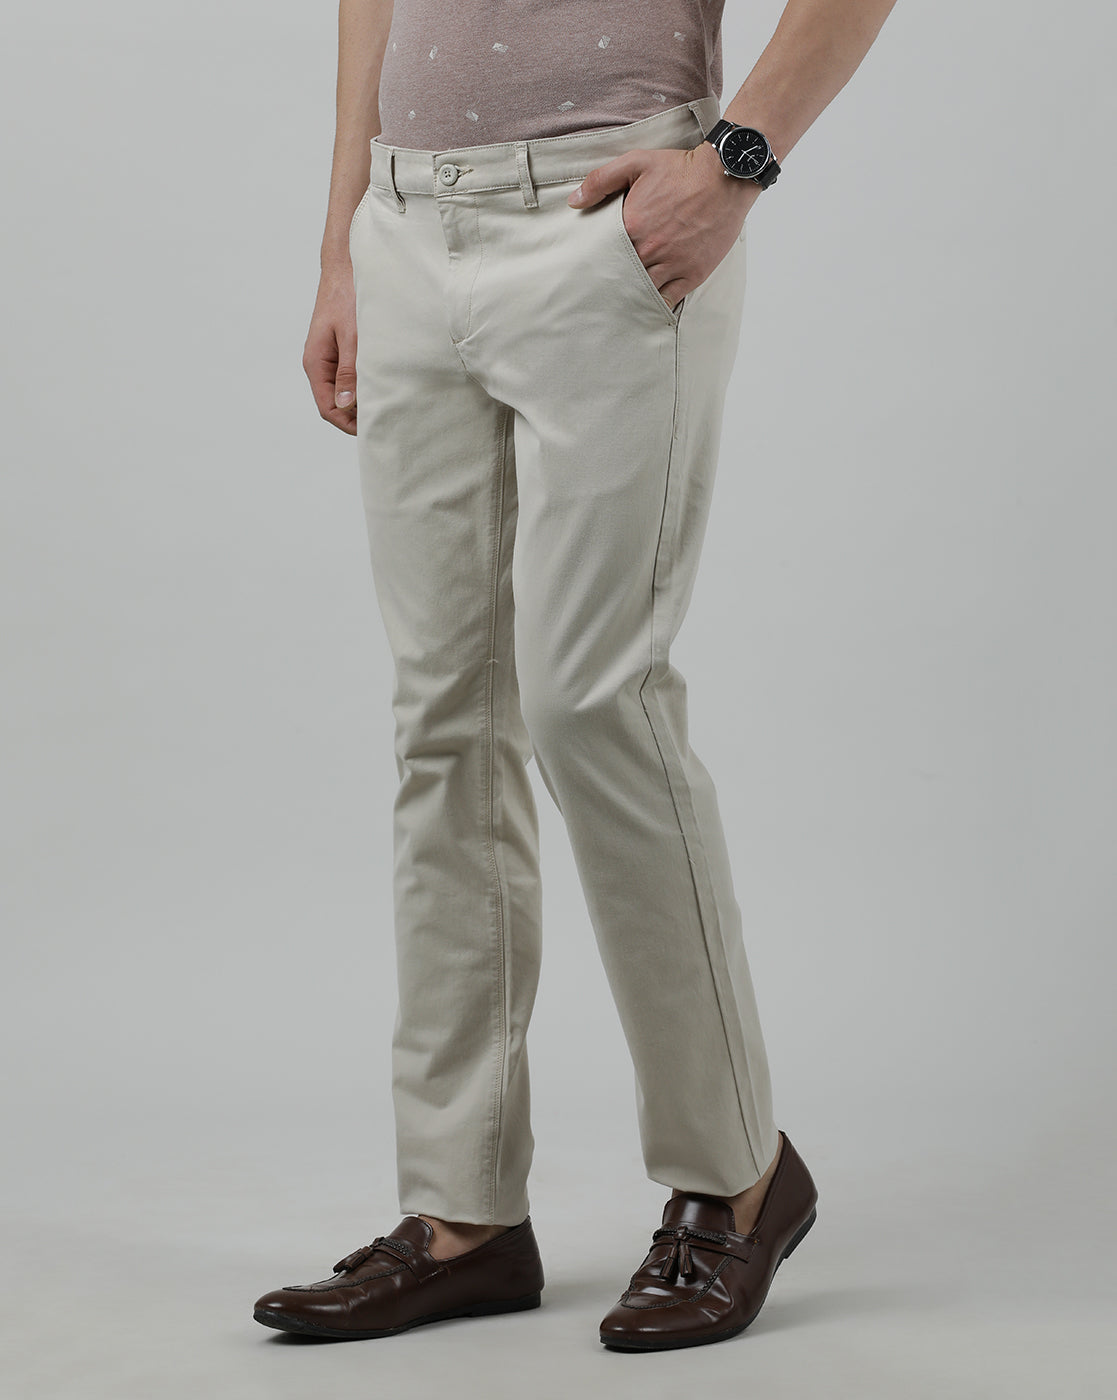 Crocodile Casual Slim Fit Solid Beige Trousers for Men